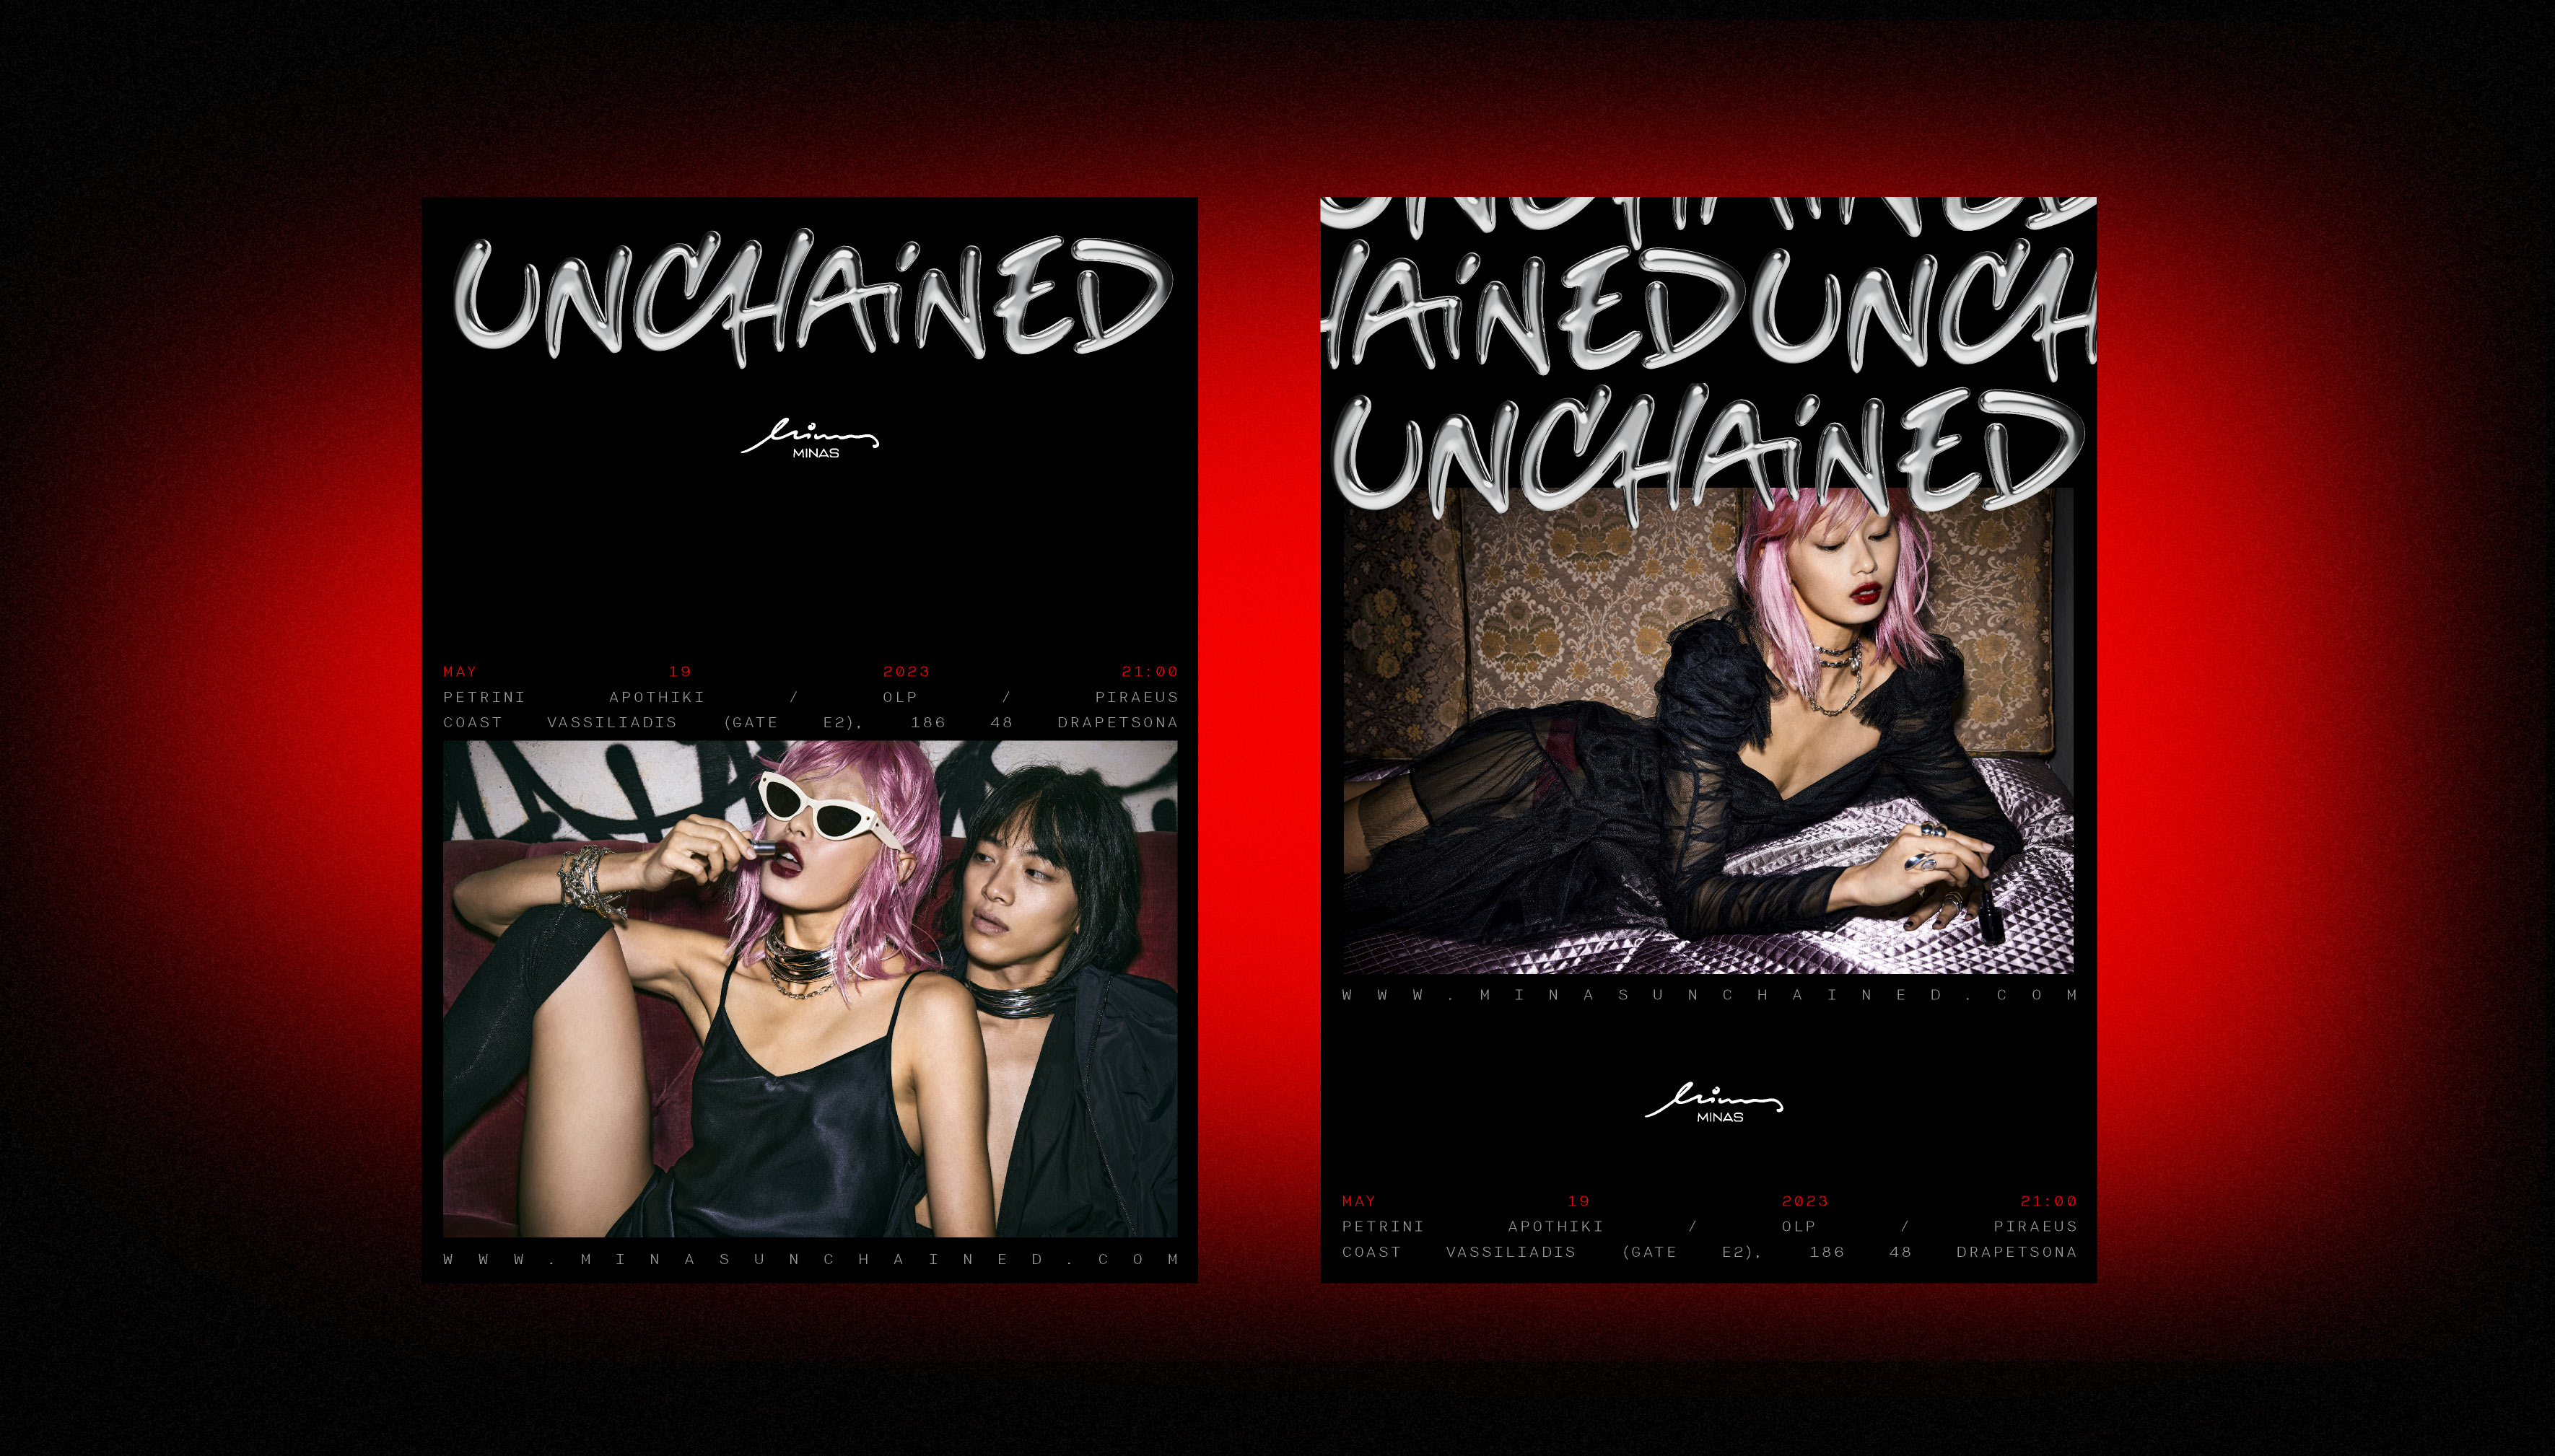 Minas Unchained branding event posters kommigraphics